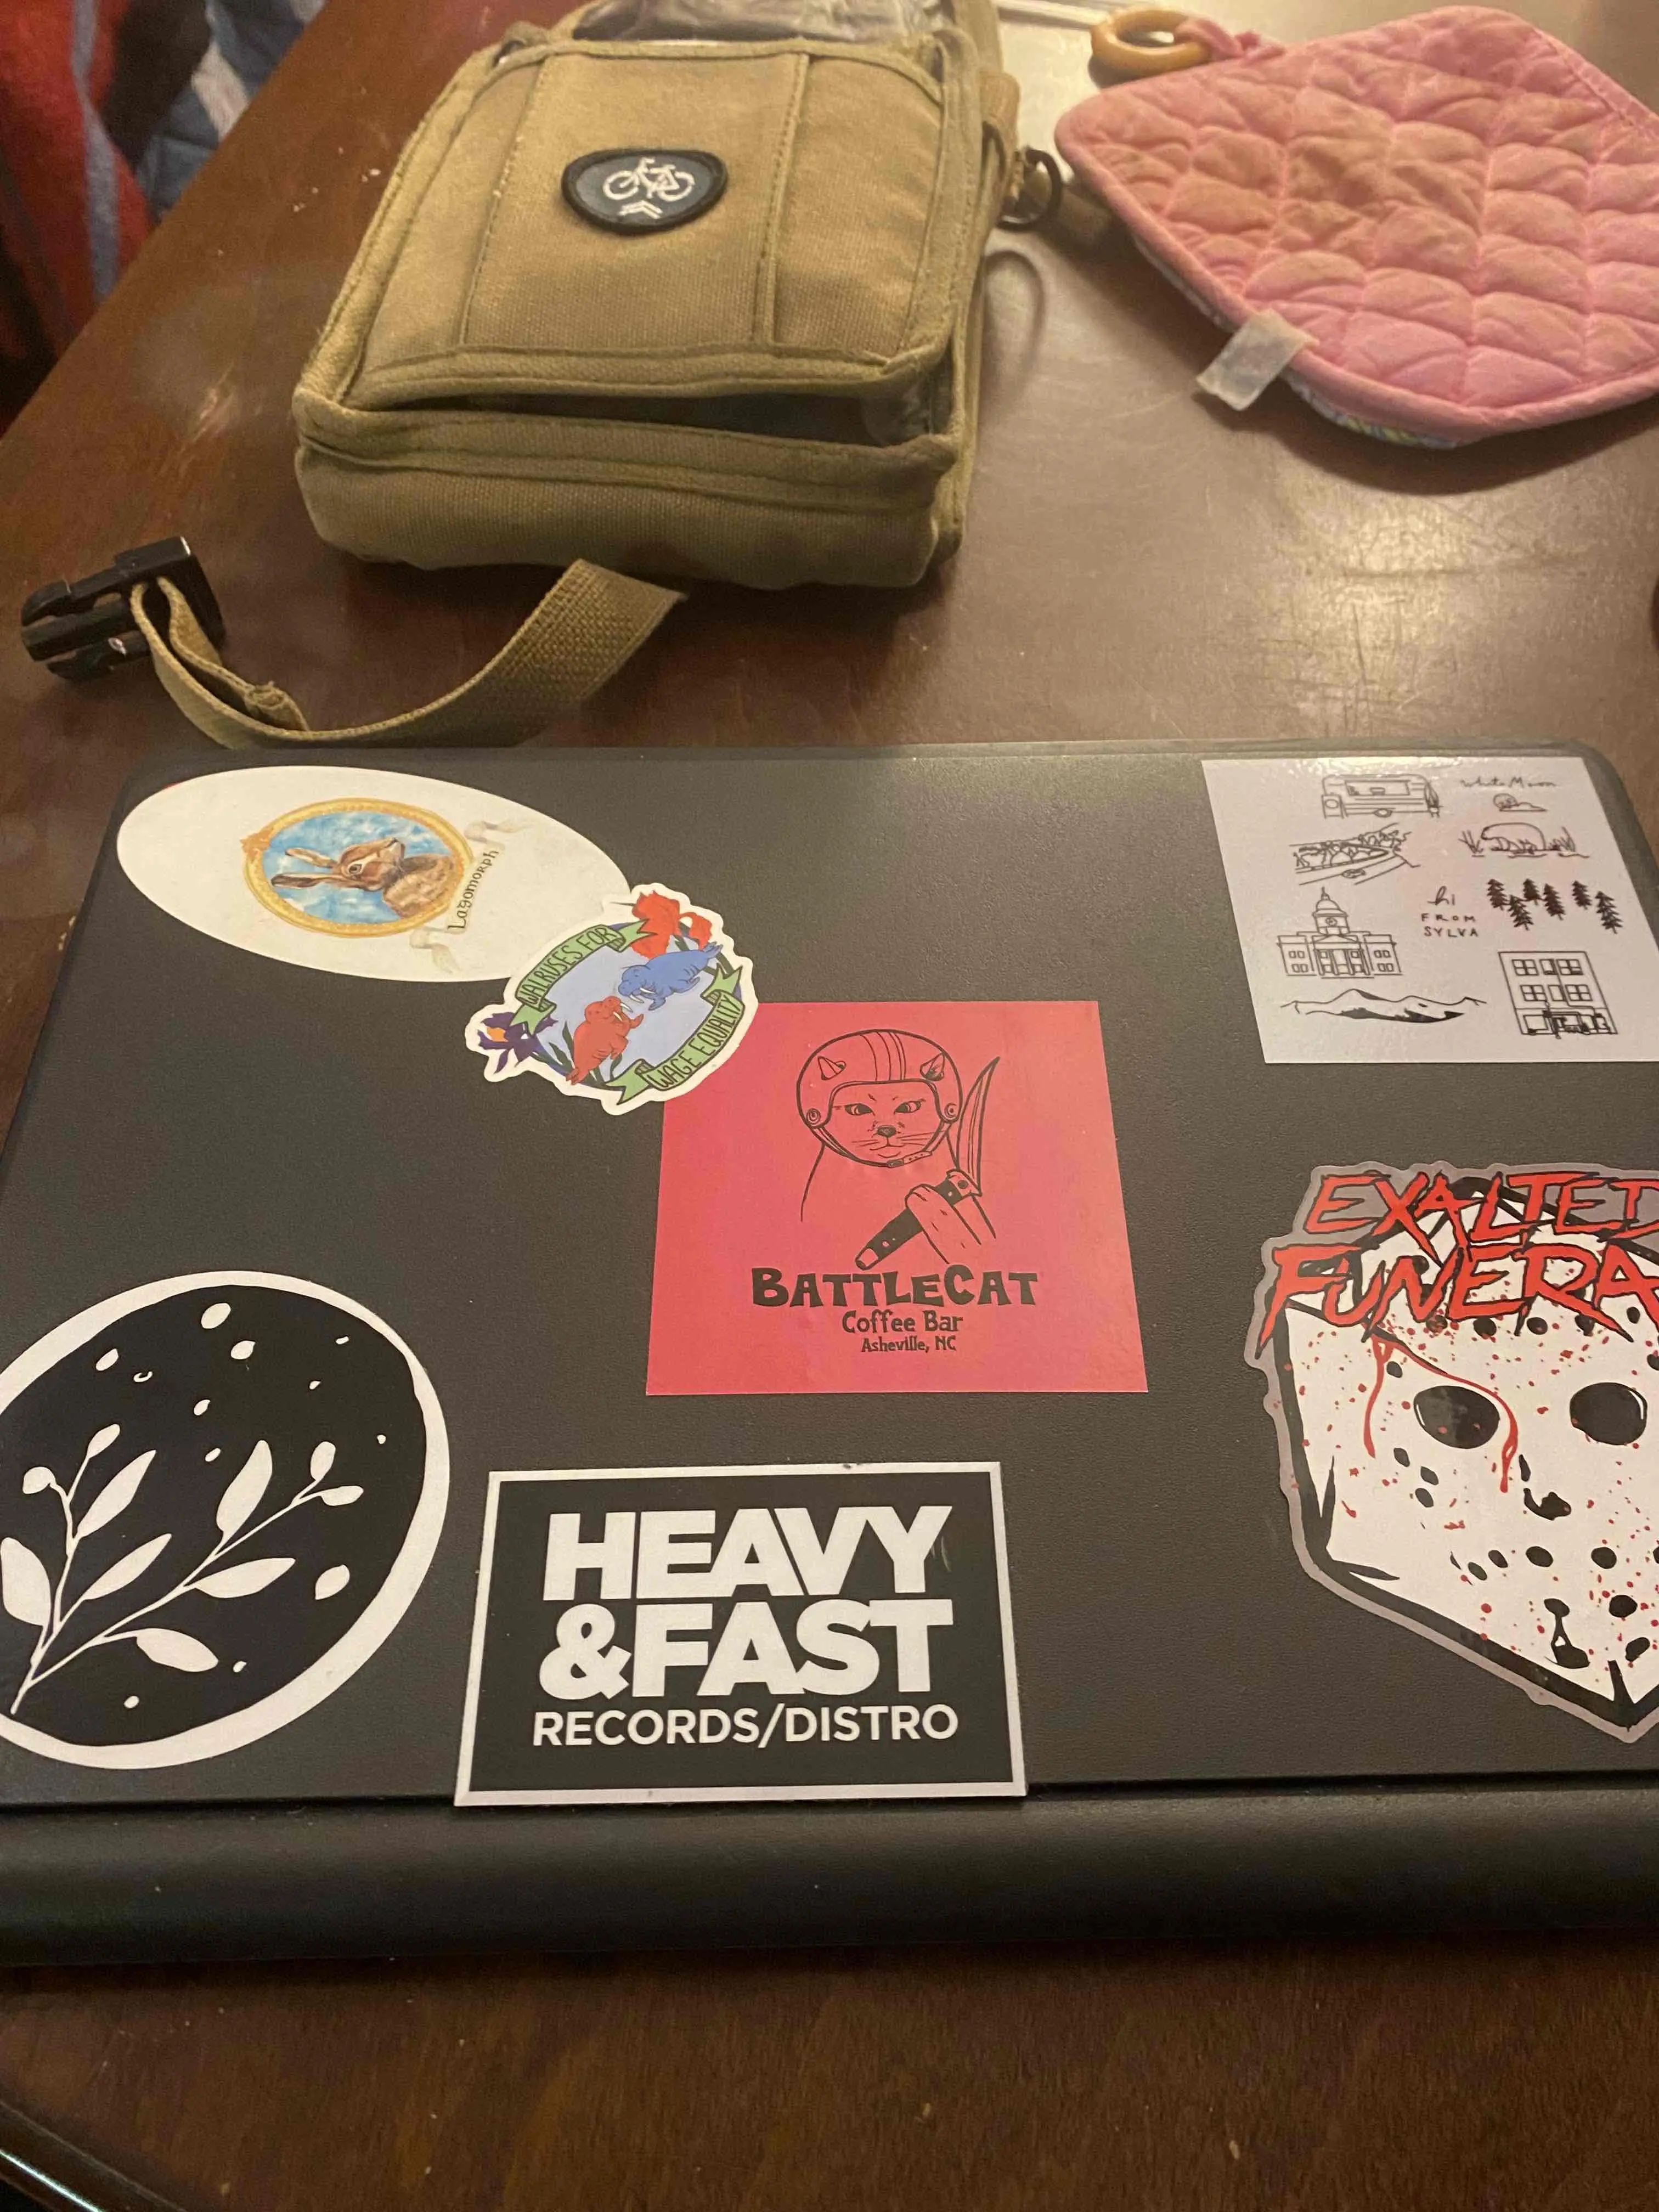 a modified chrome book covered in stickers